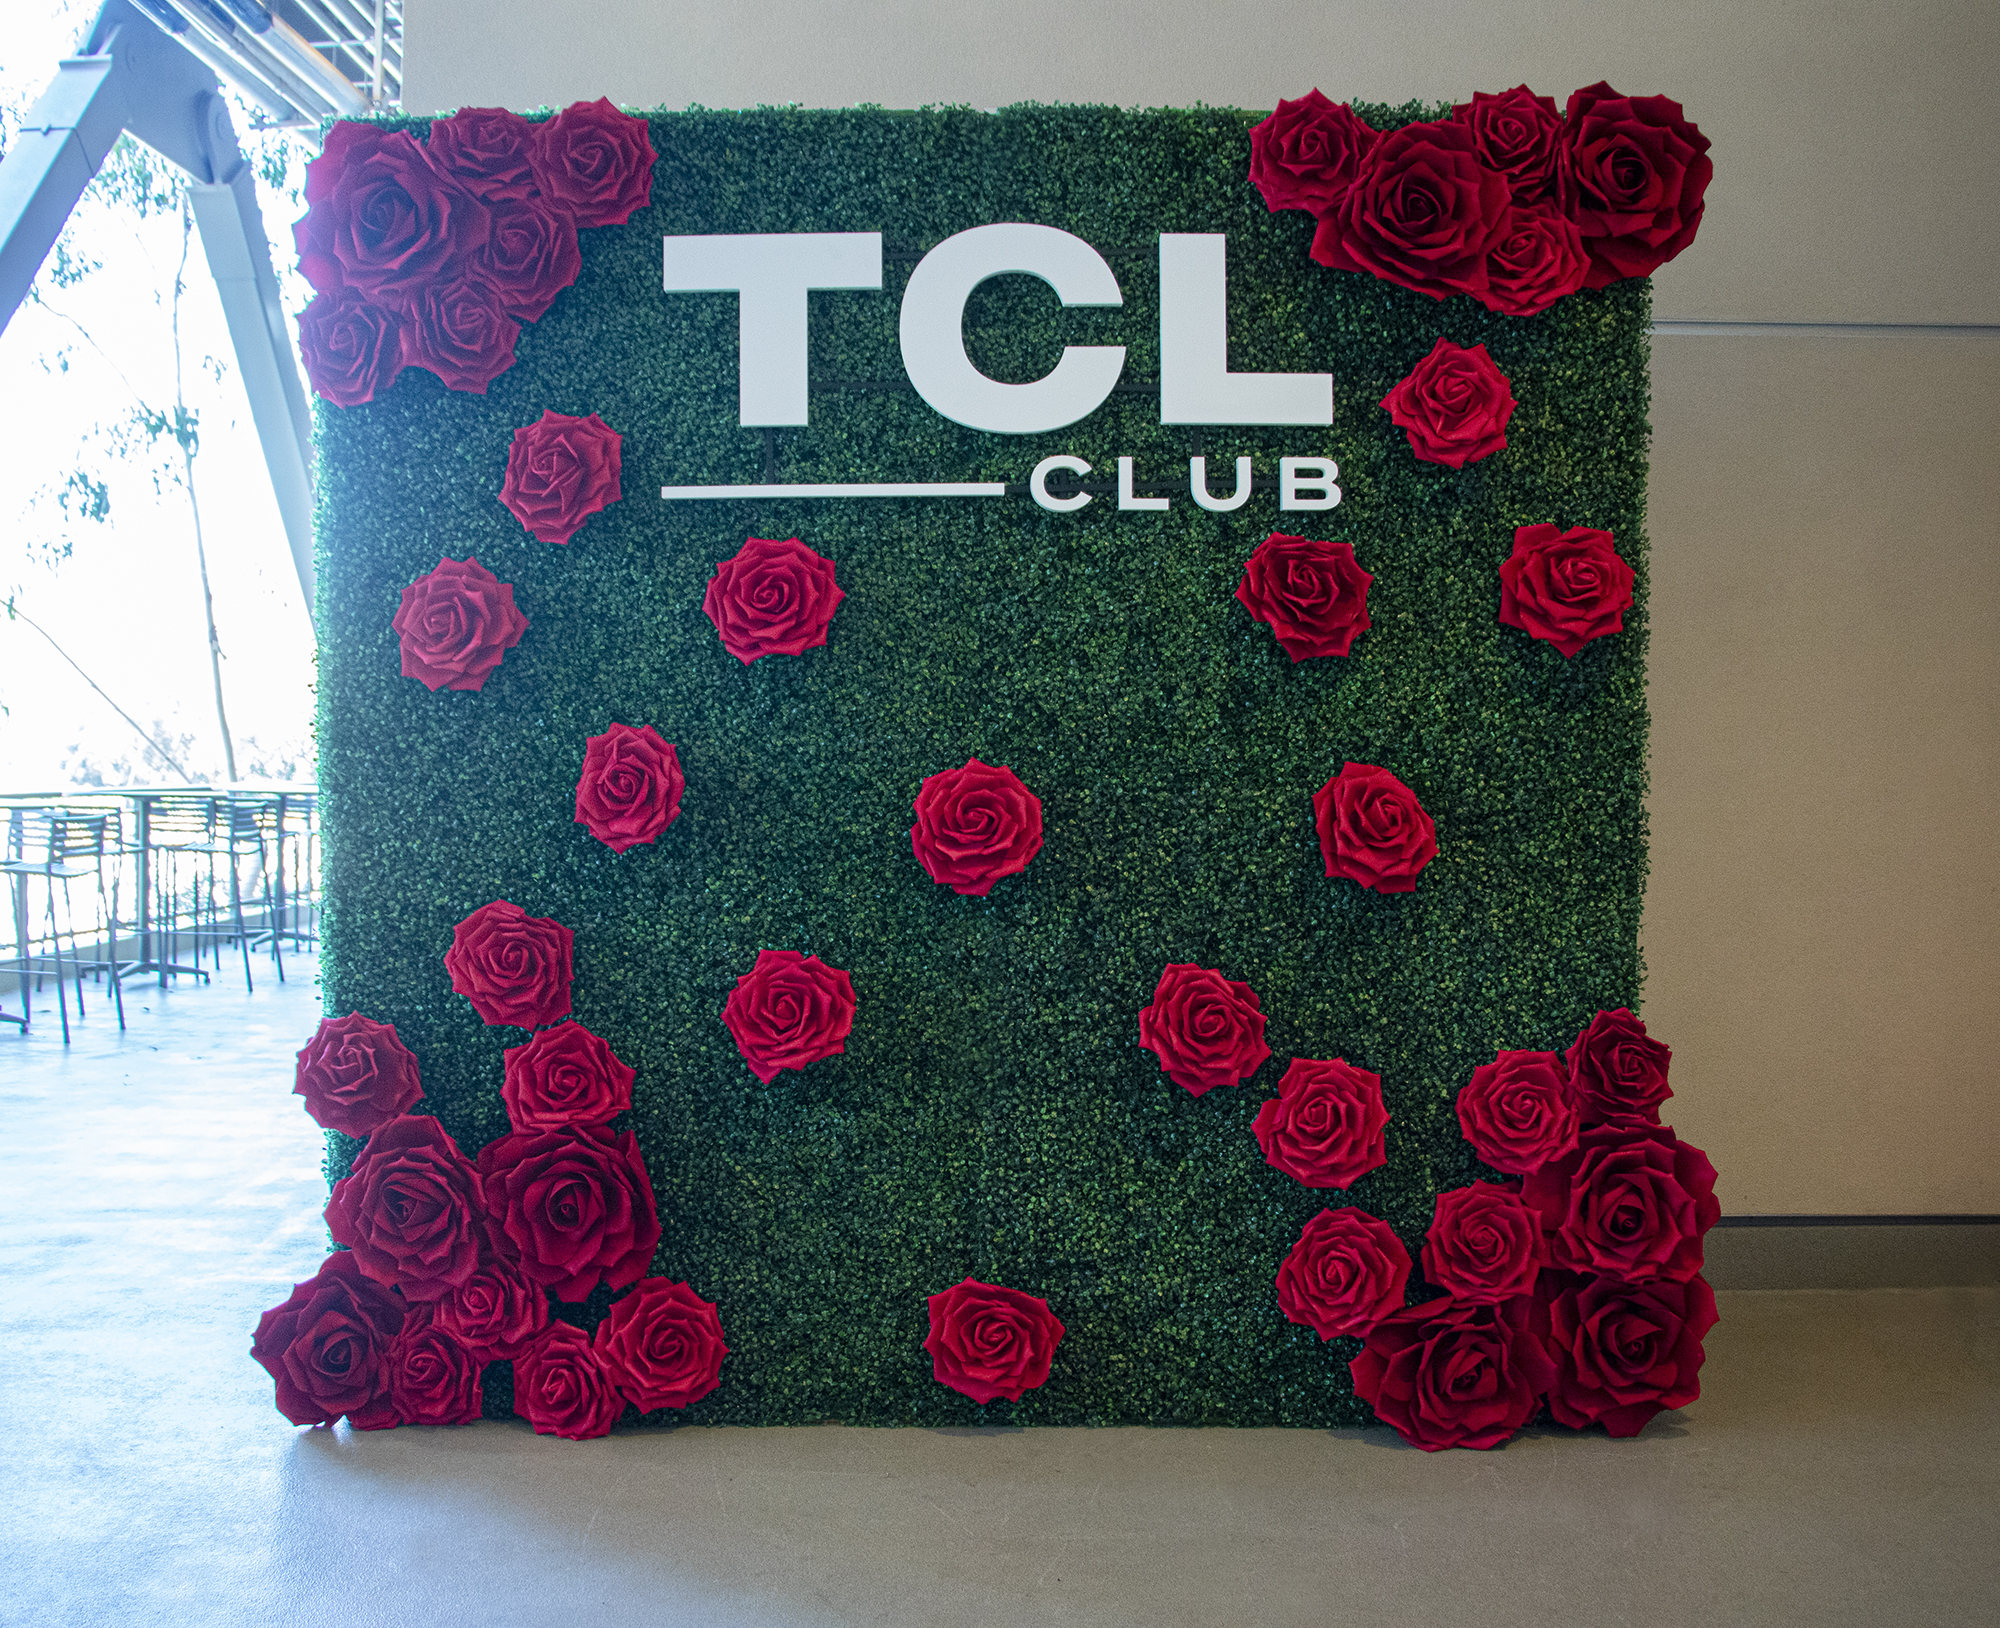 Beautiful hedge wall with big red roses and custom letters!